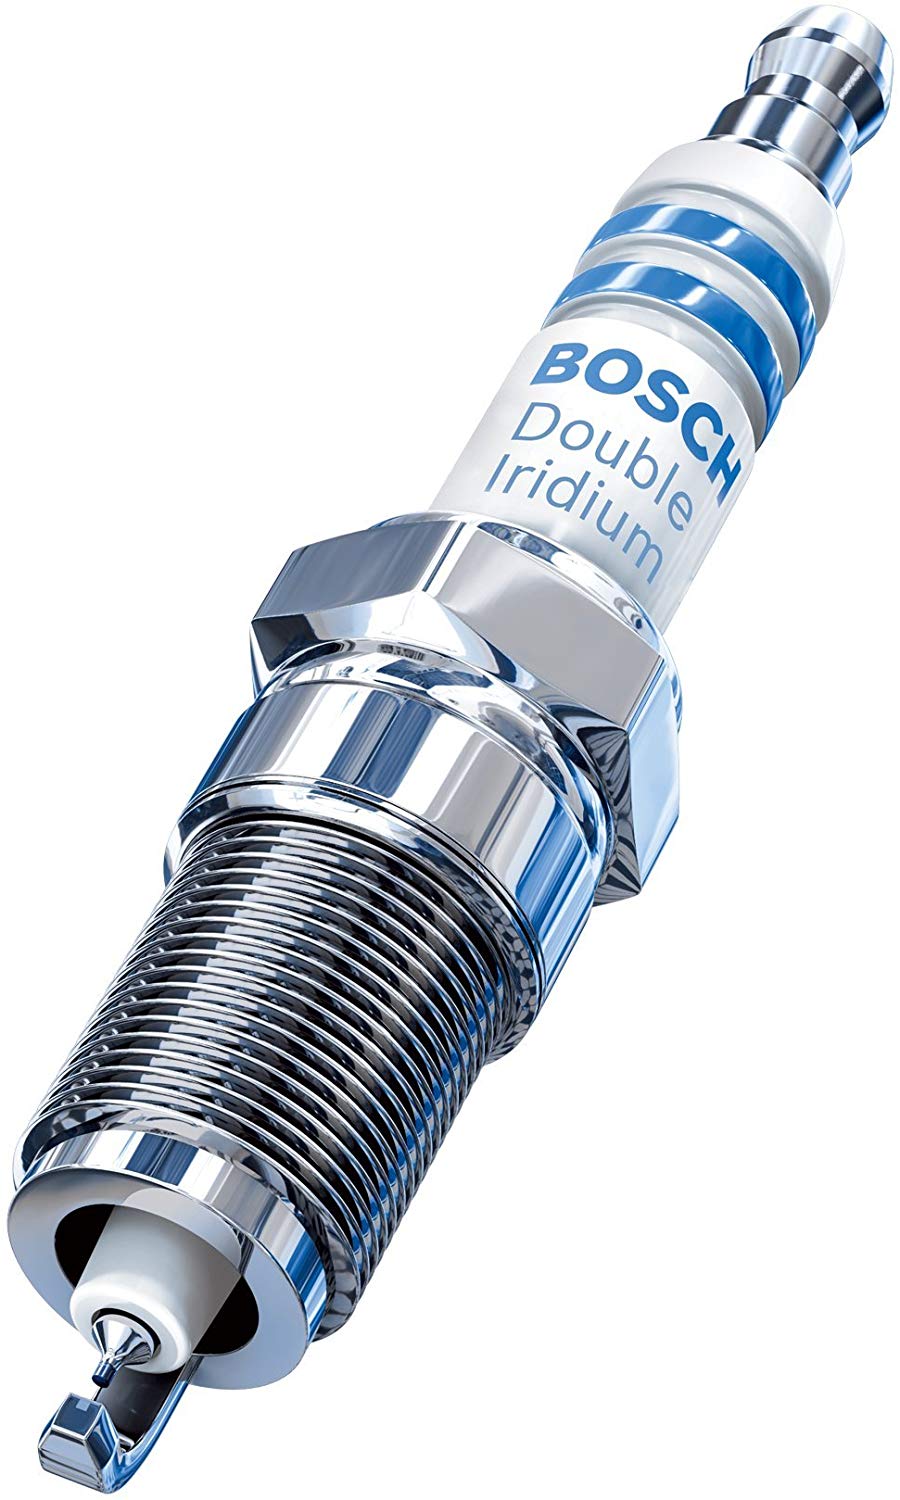 Bosch ZR6SII3320 Double Iridium OE Replacement Spark Plug Up to 4X Longer Life (1 Pk) Mercedes-Benz: CLS, AMG, S, C, E, GLE, GLK, GL, Maybach, ML, R, SLK, SL +More